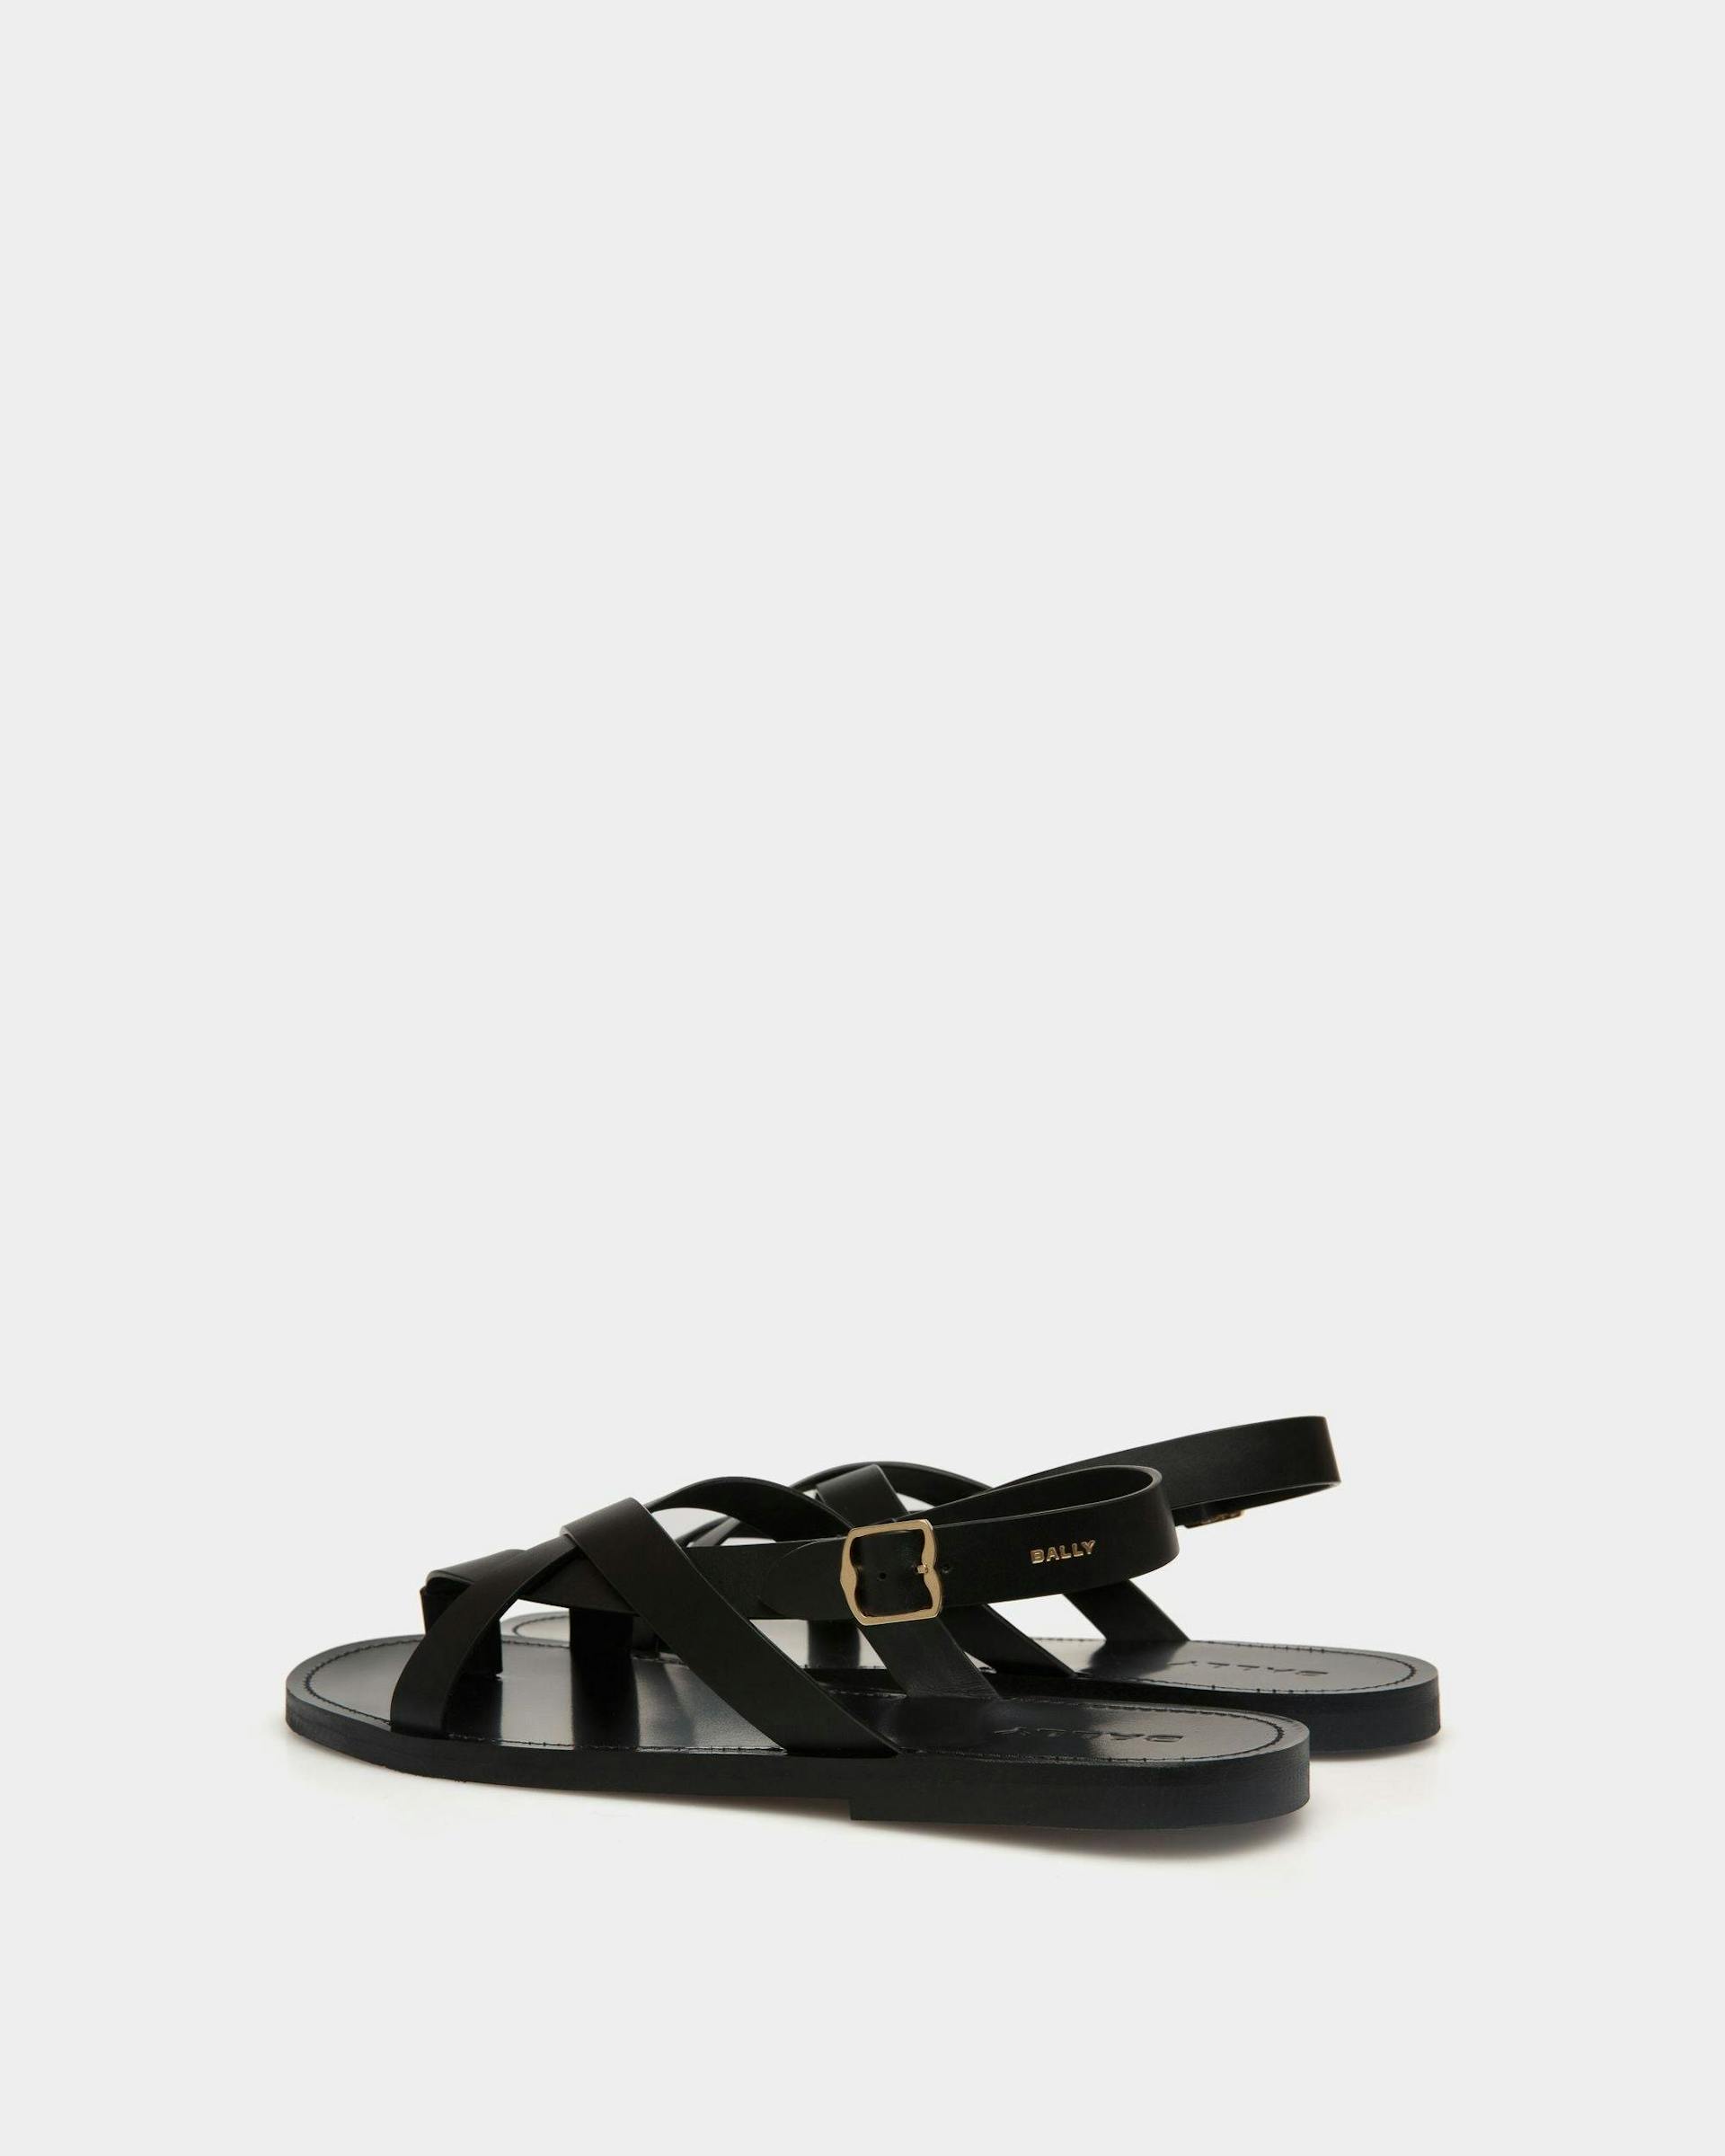 Men's Chateau Sandal in Leather | Bally | Still Life 3/4 Back